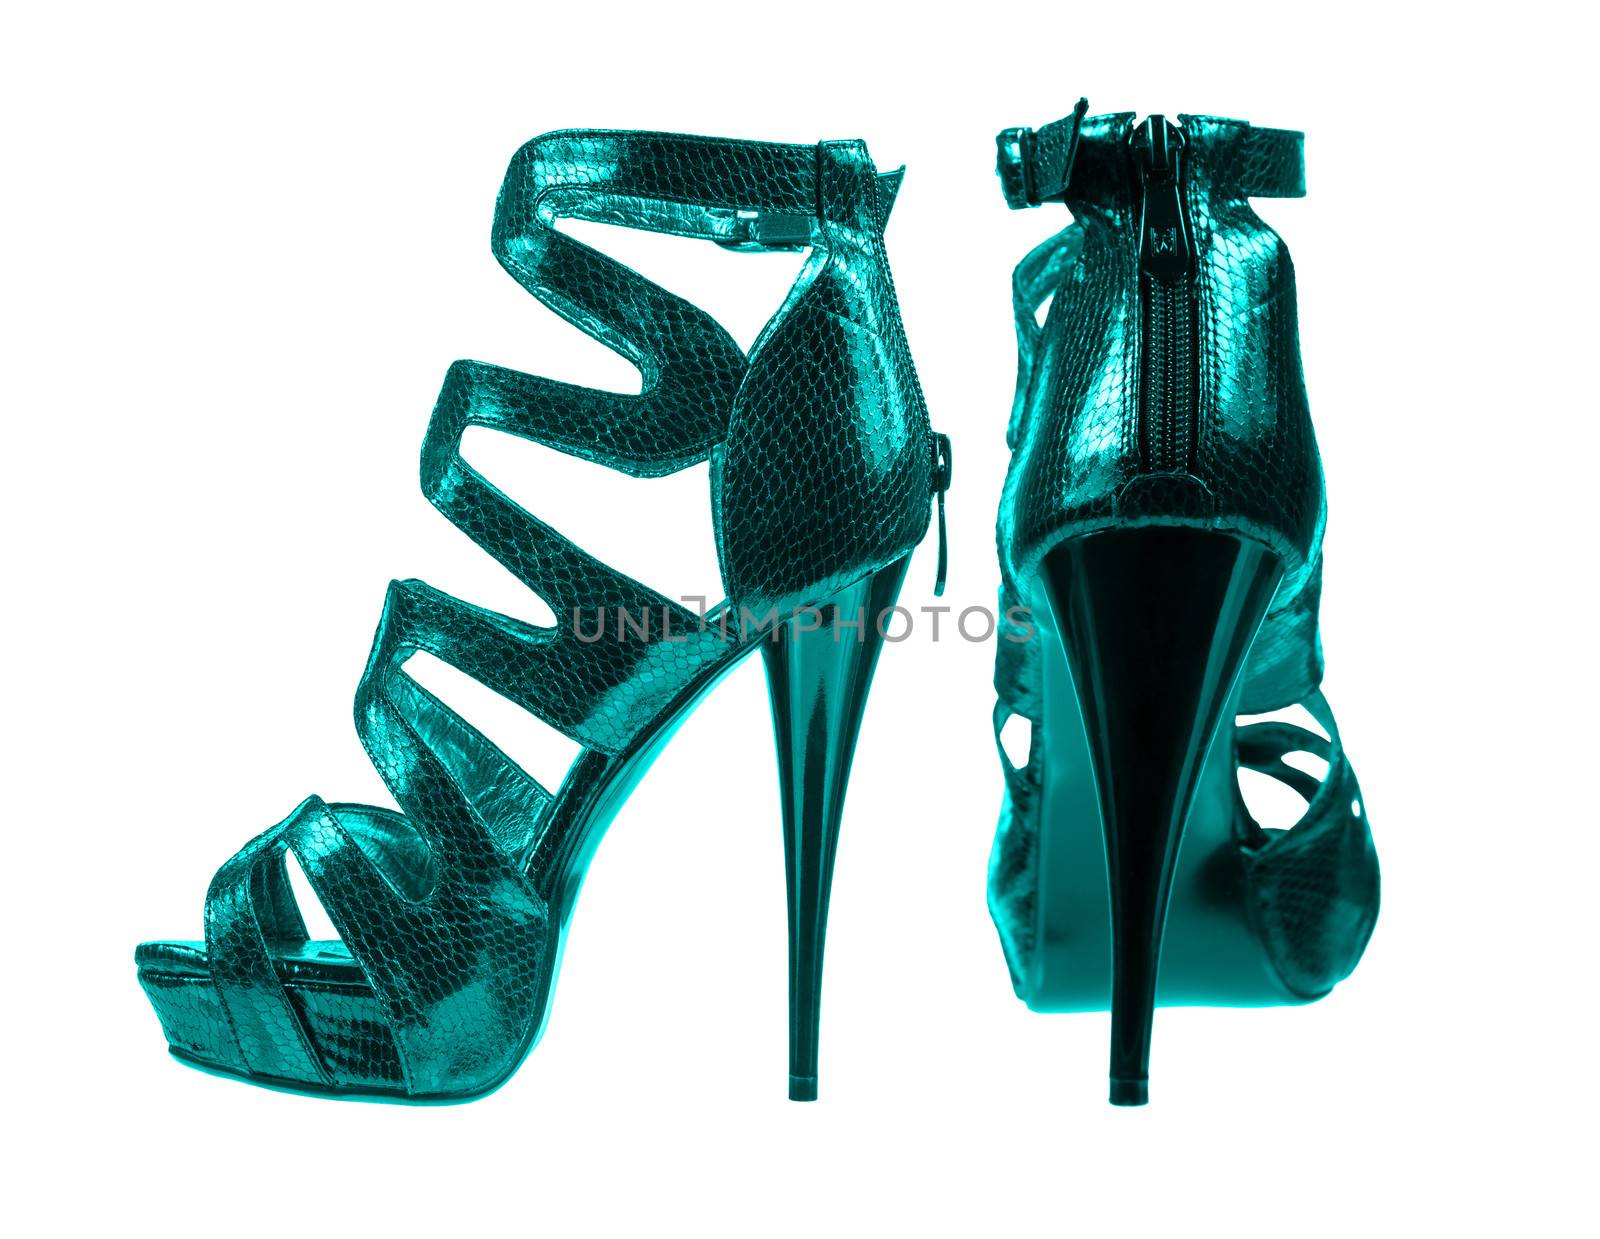 Women's shoes dark turquoise colors. collage  by AleksandrN